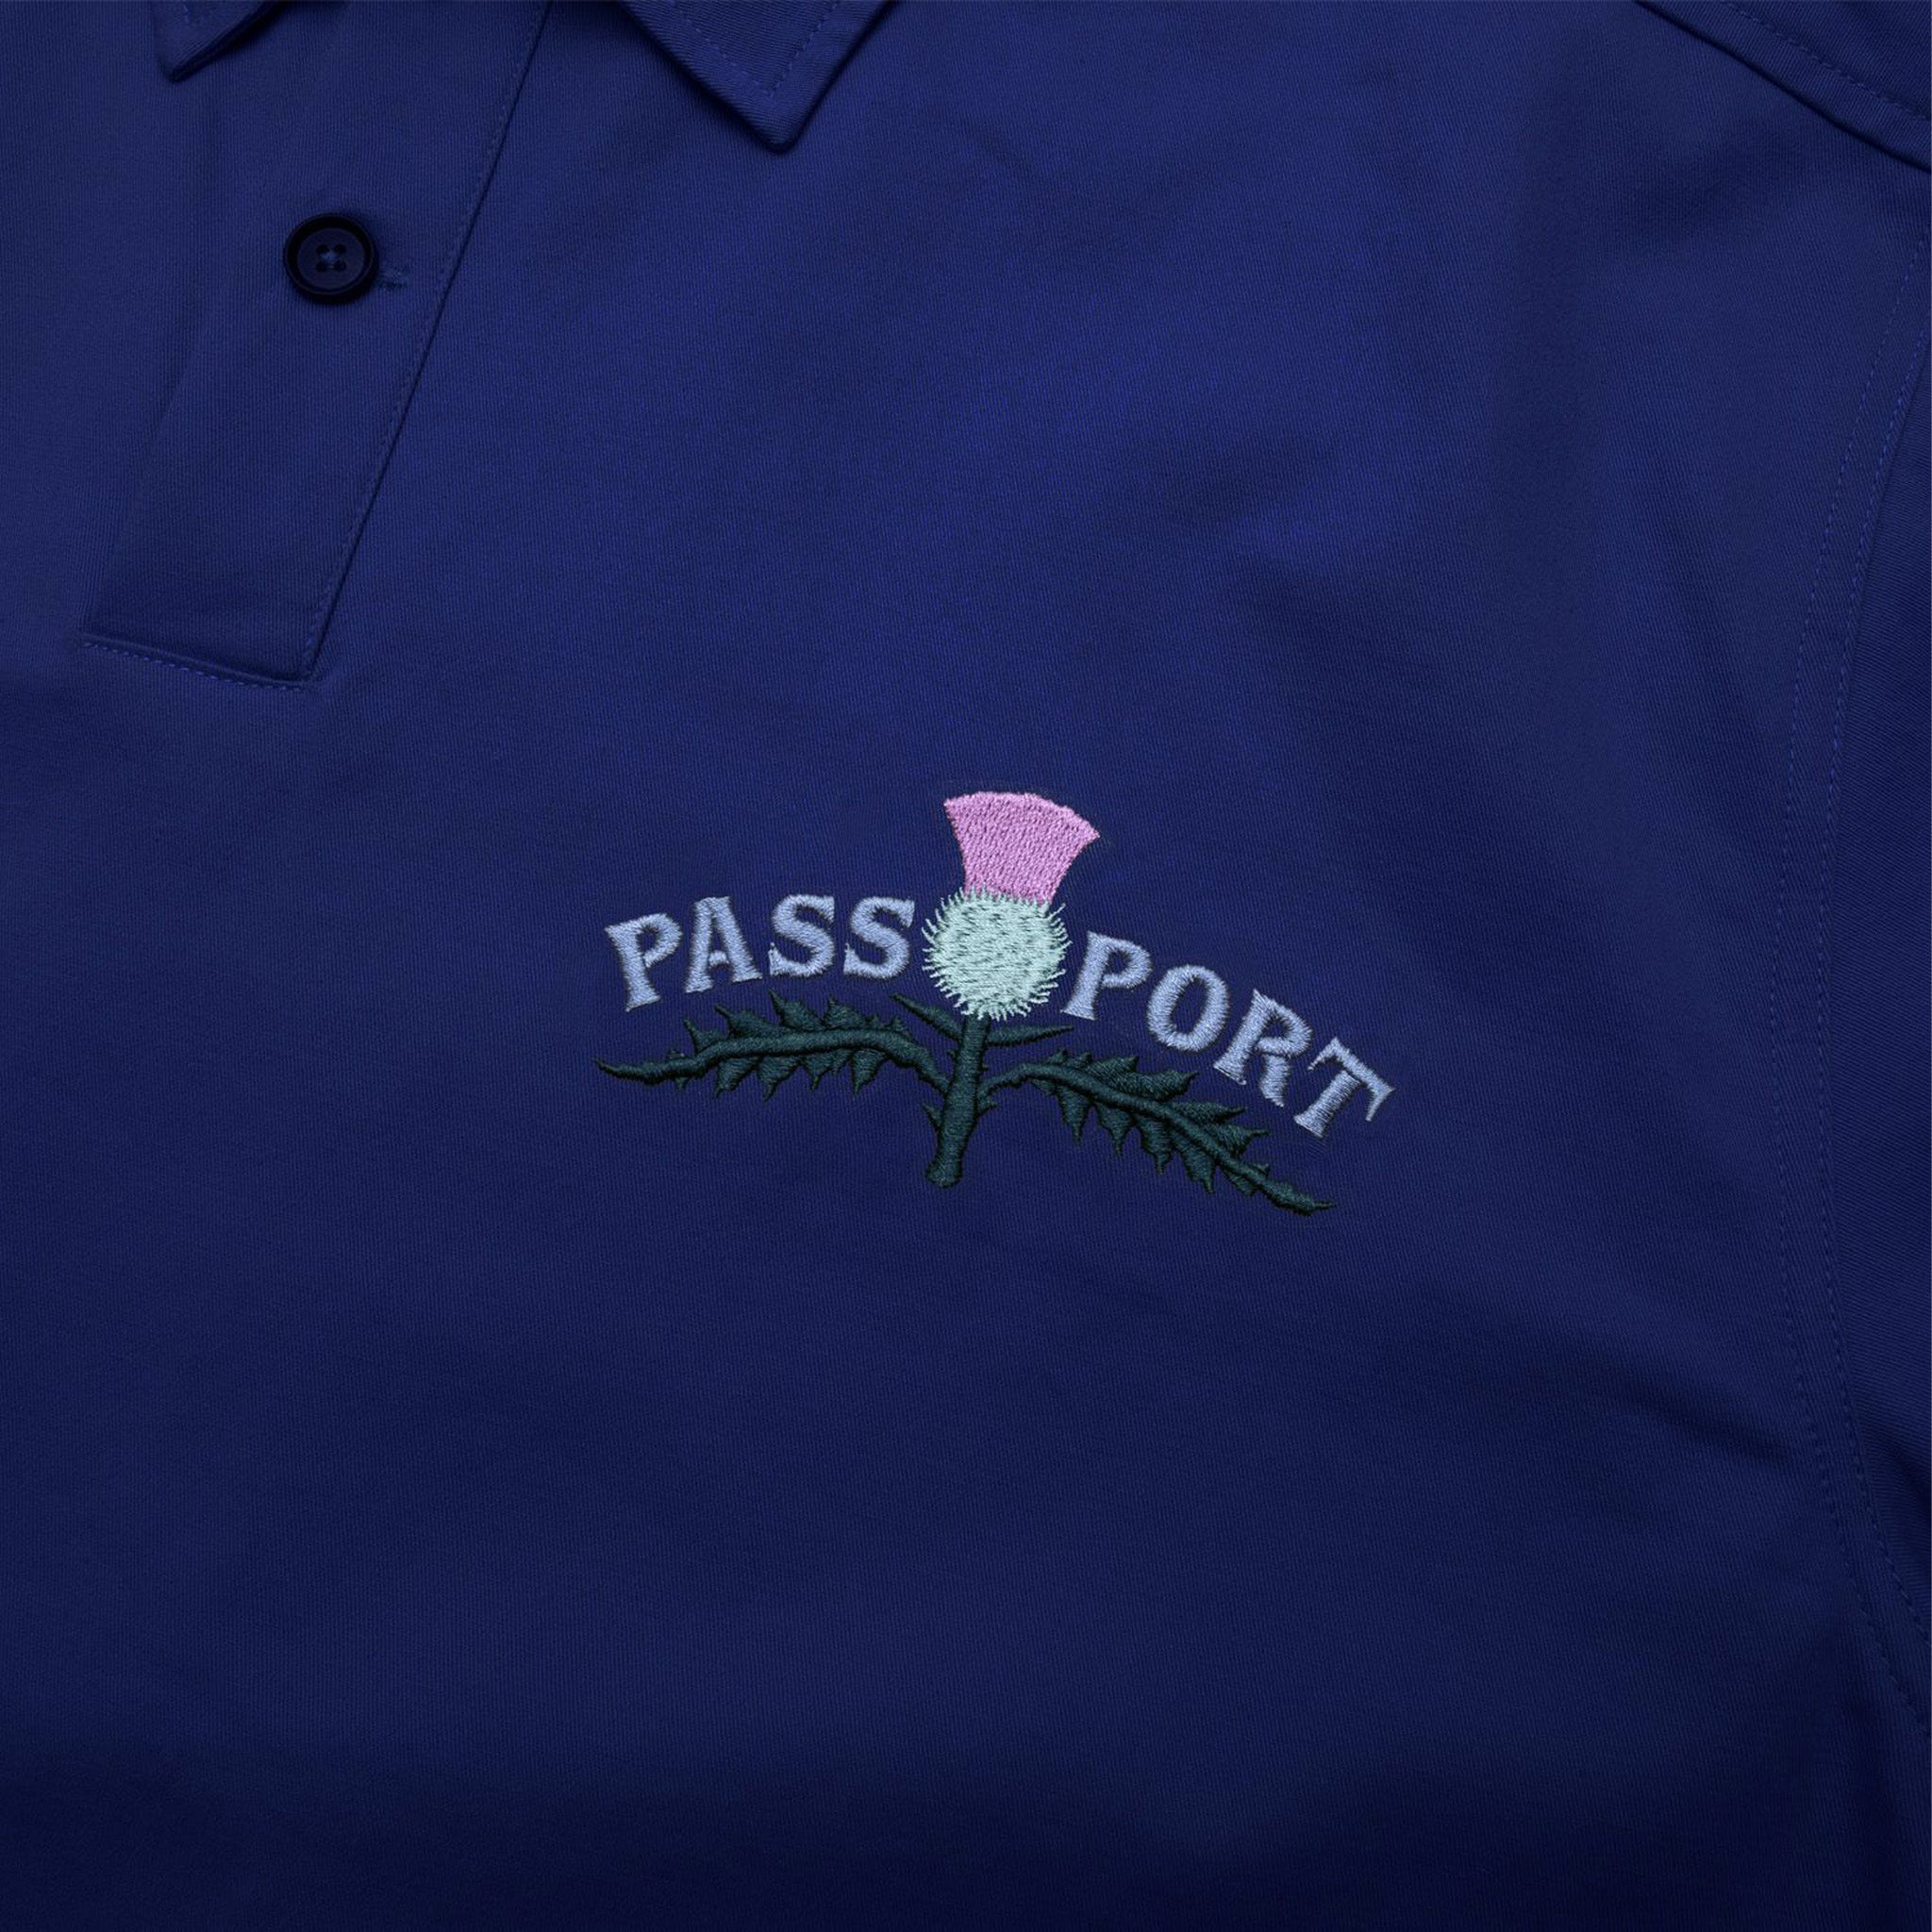 Pass-Port Thistle Polo (Navy) - August Shop